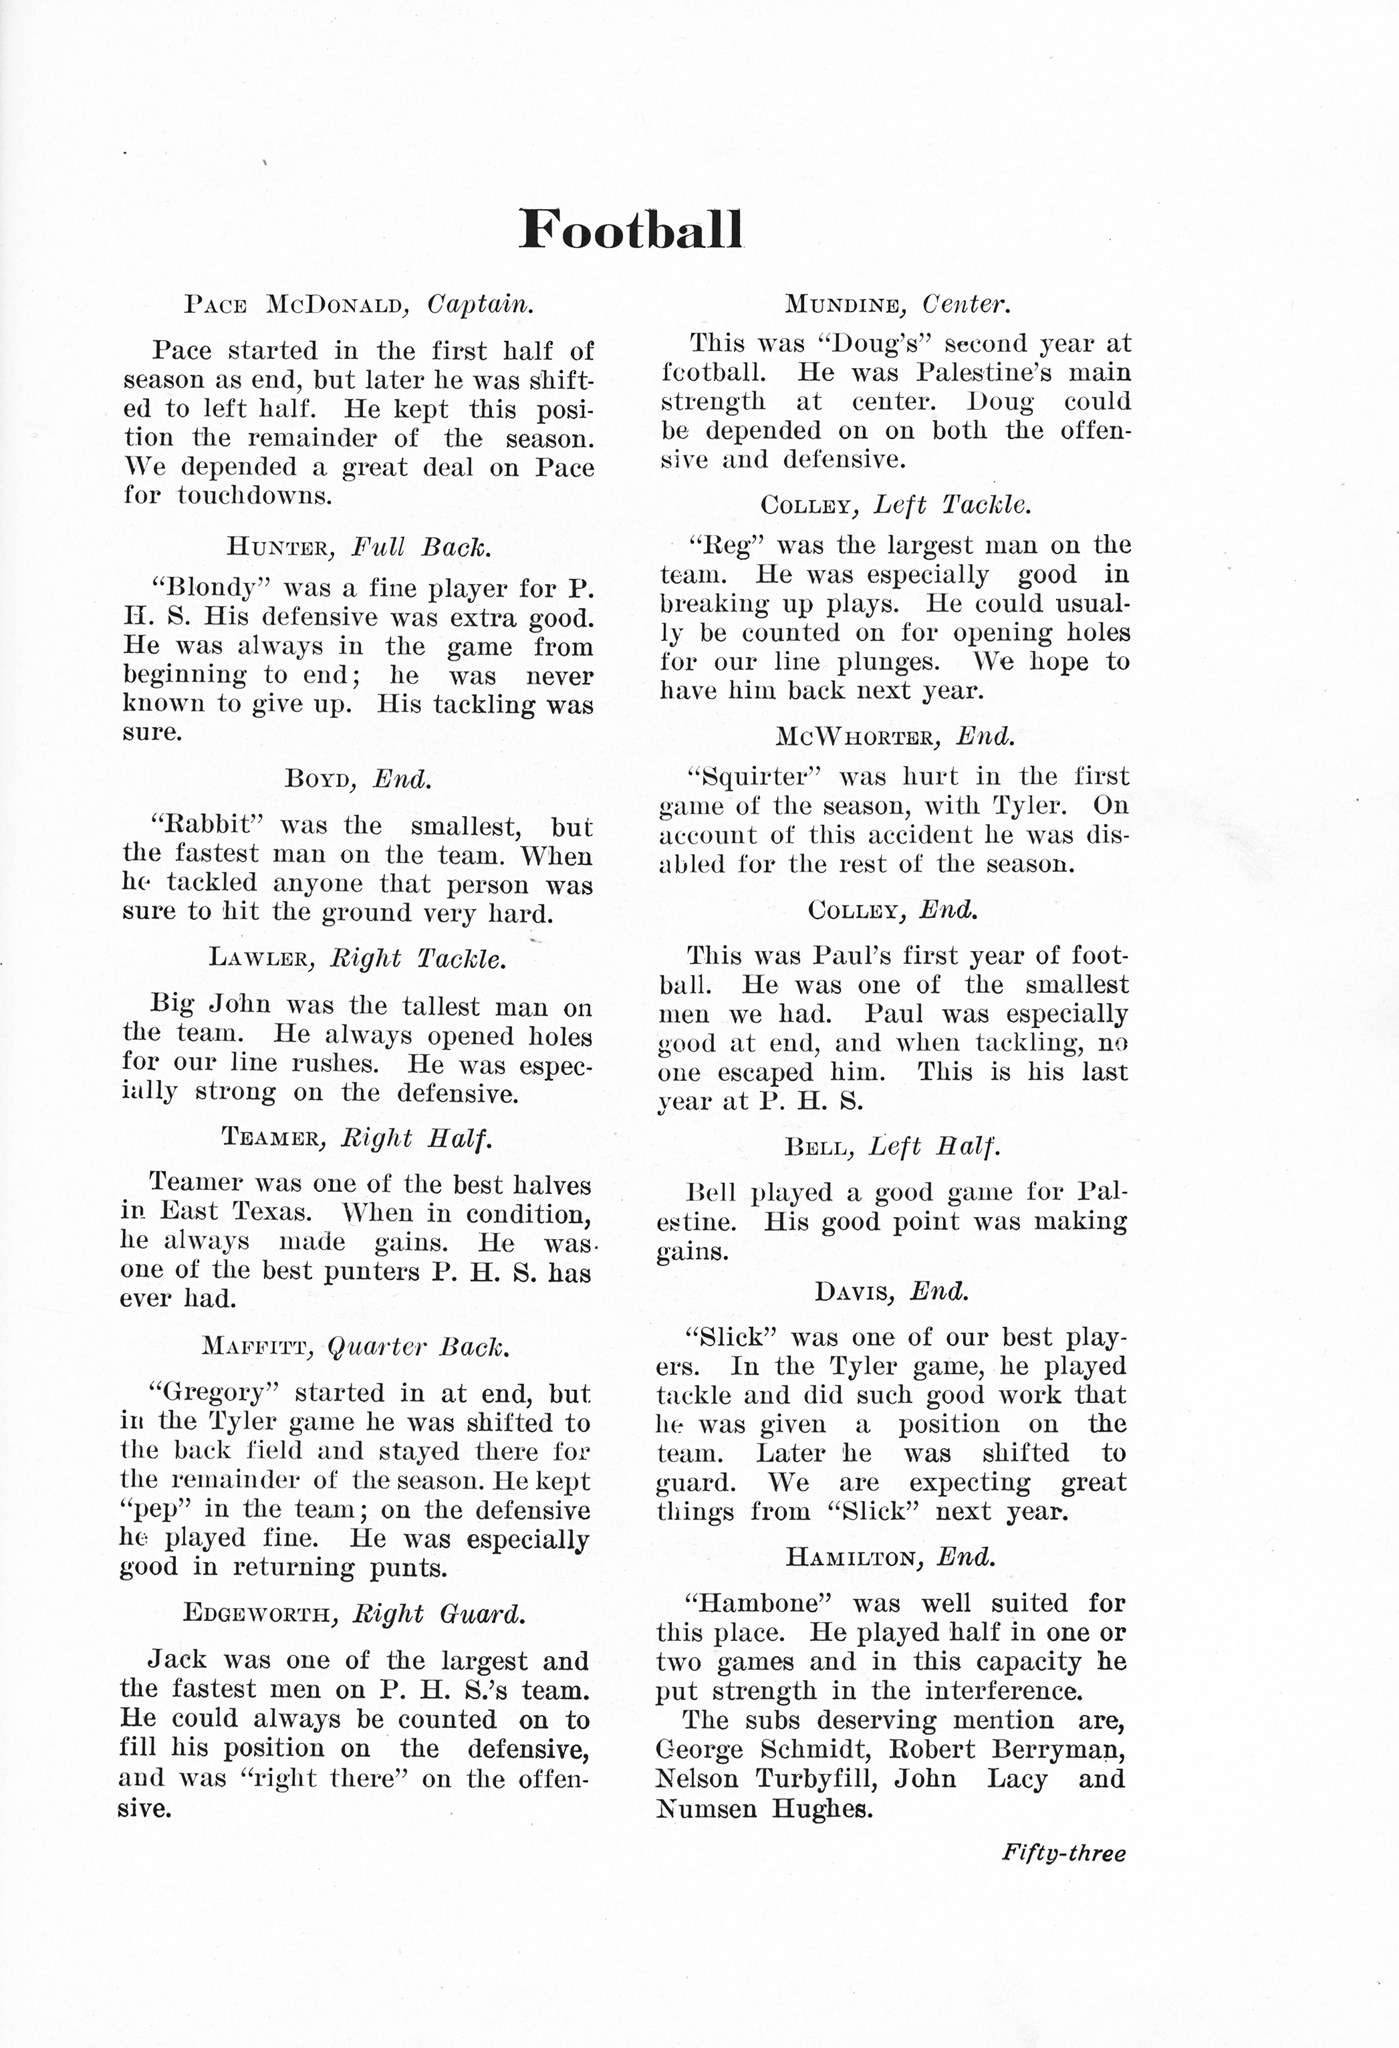 ../../../Images/Large/1917/Arclight-1917-pg0053.jpg